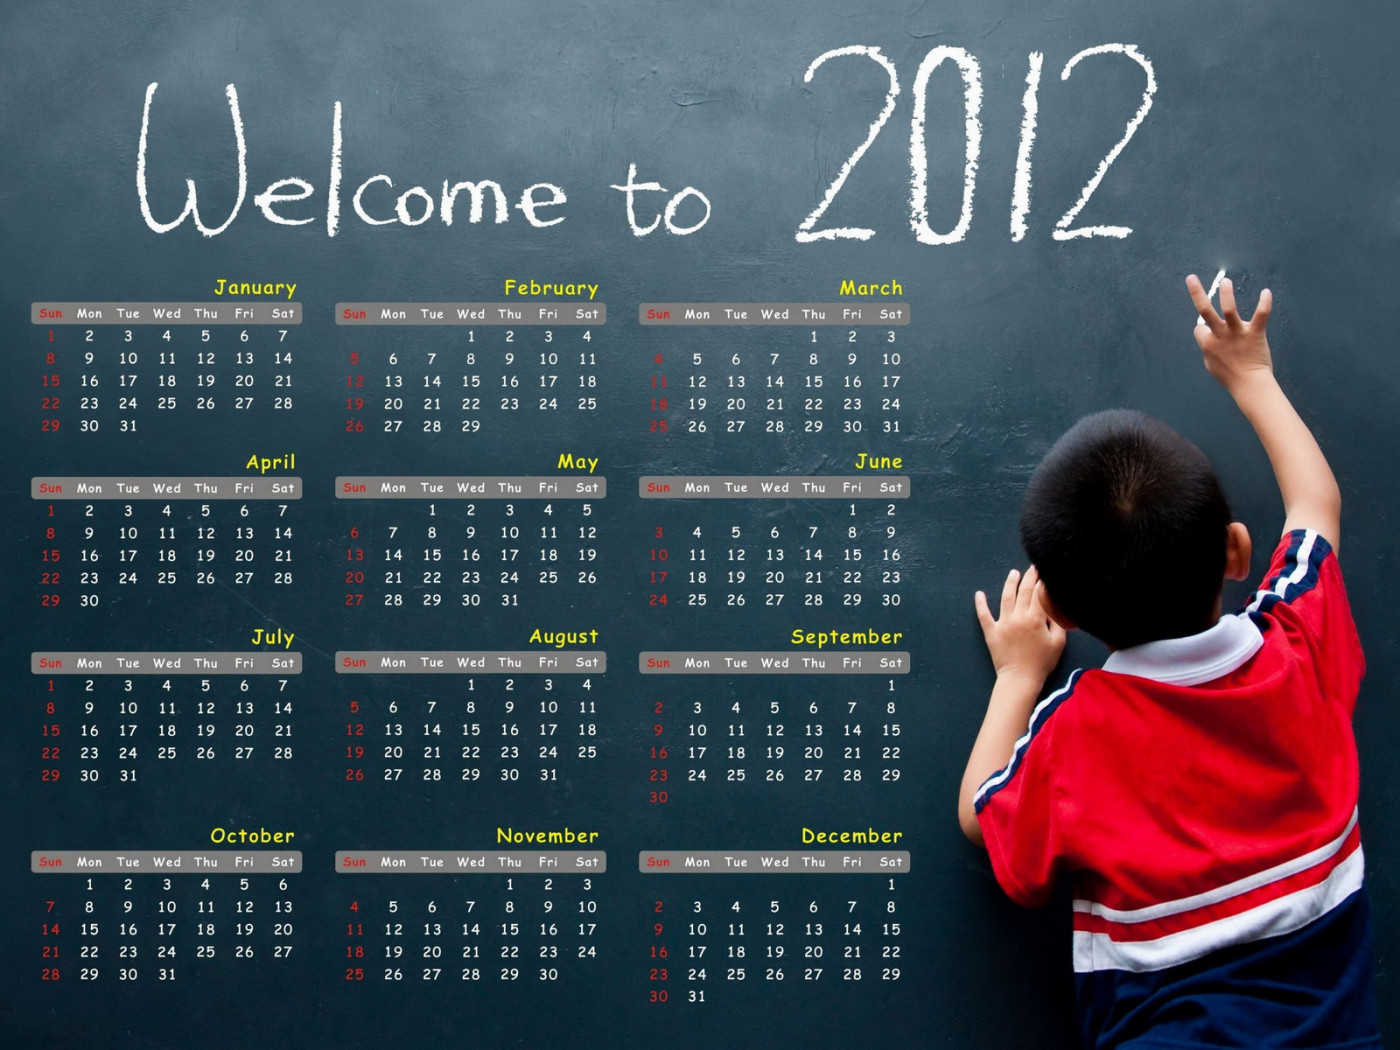 Welcome to 2012 year